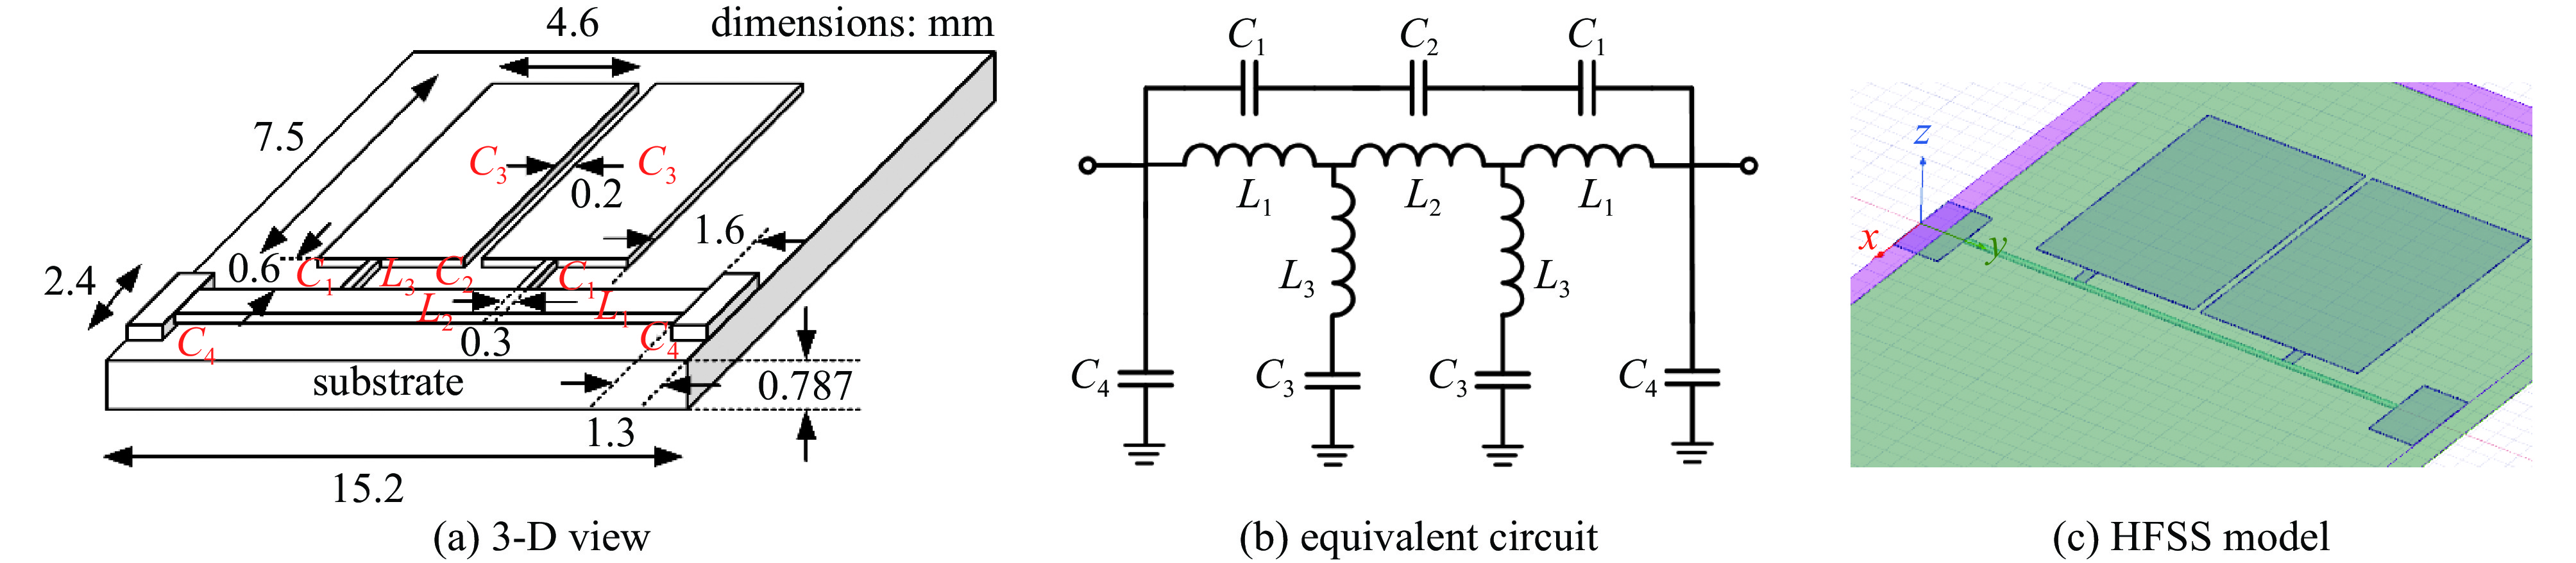 The proposed compact microstrip resonant cell